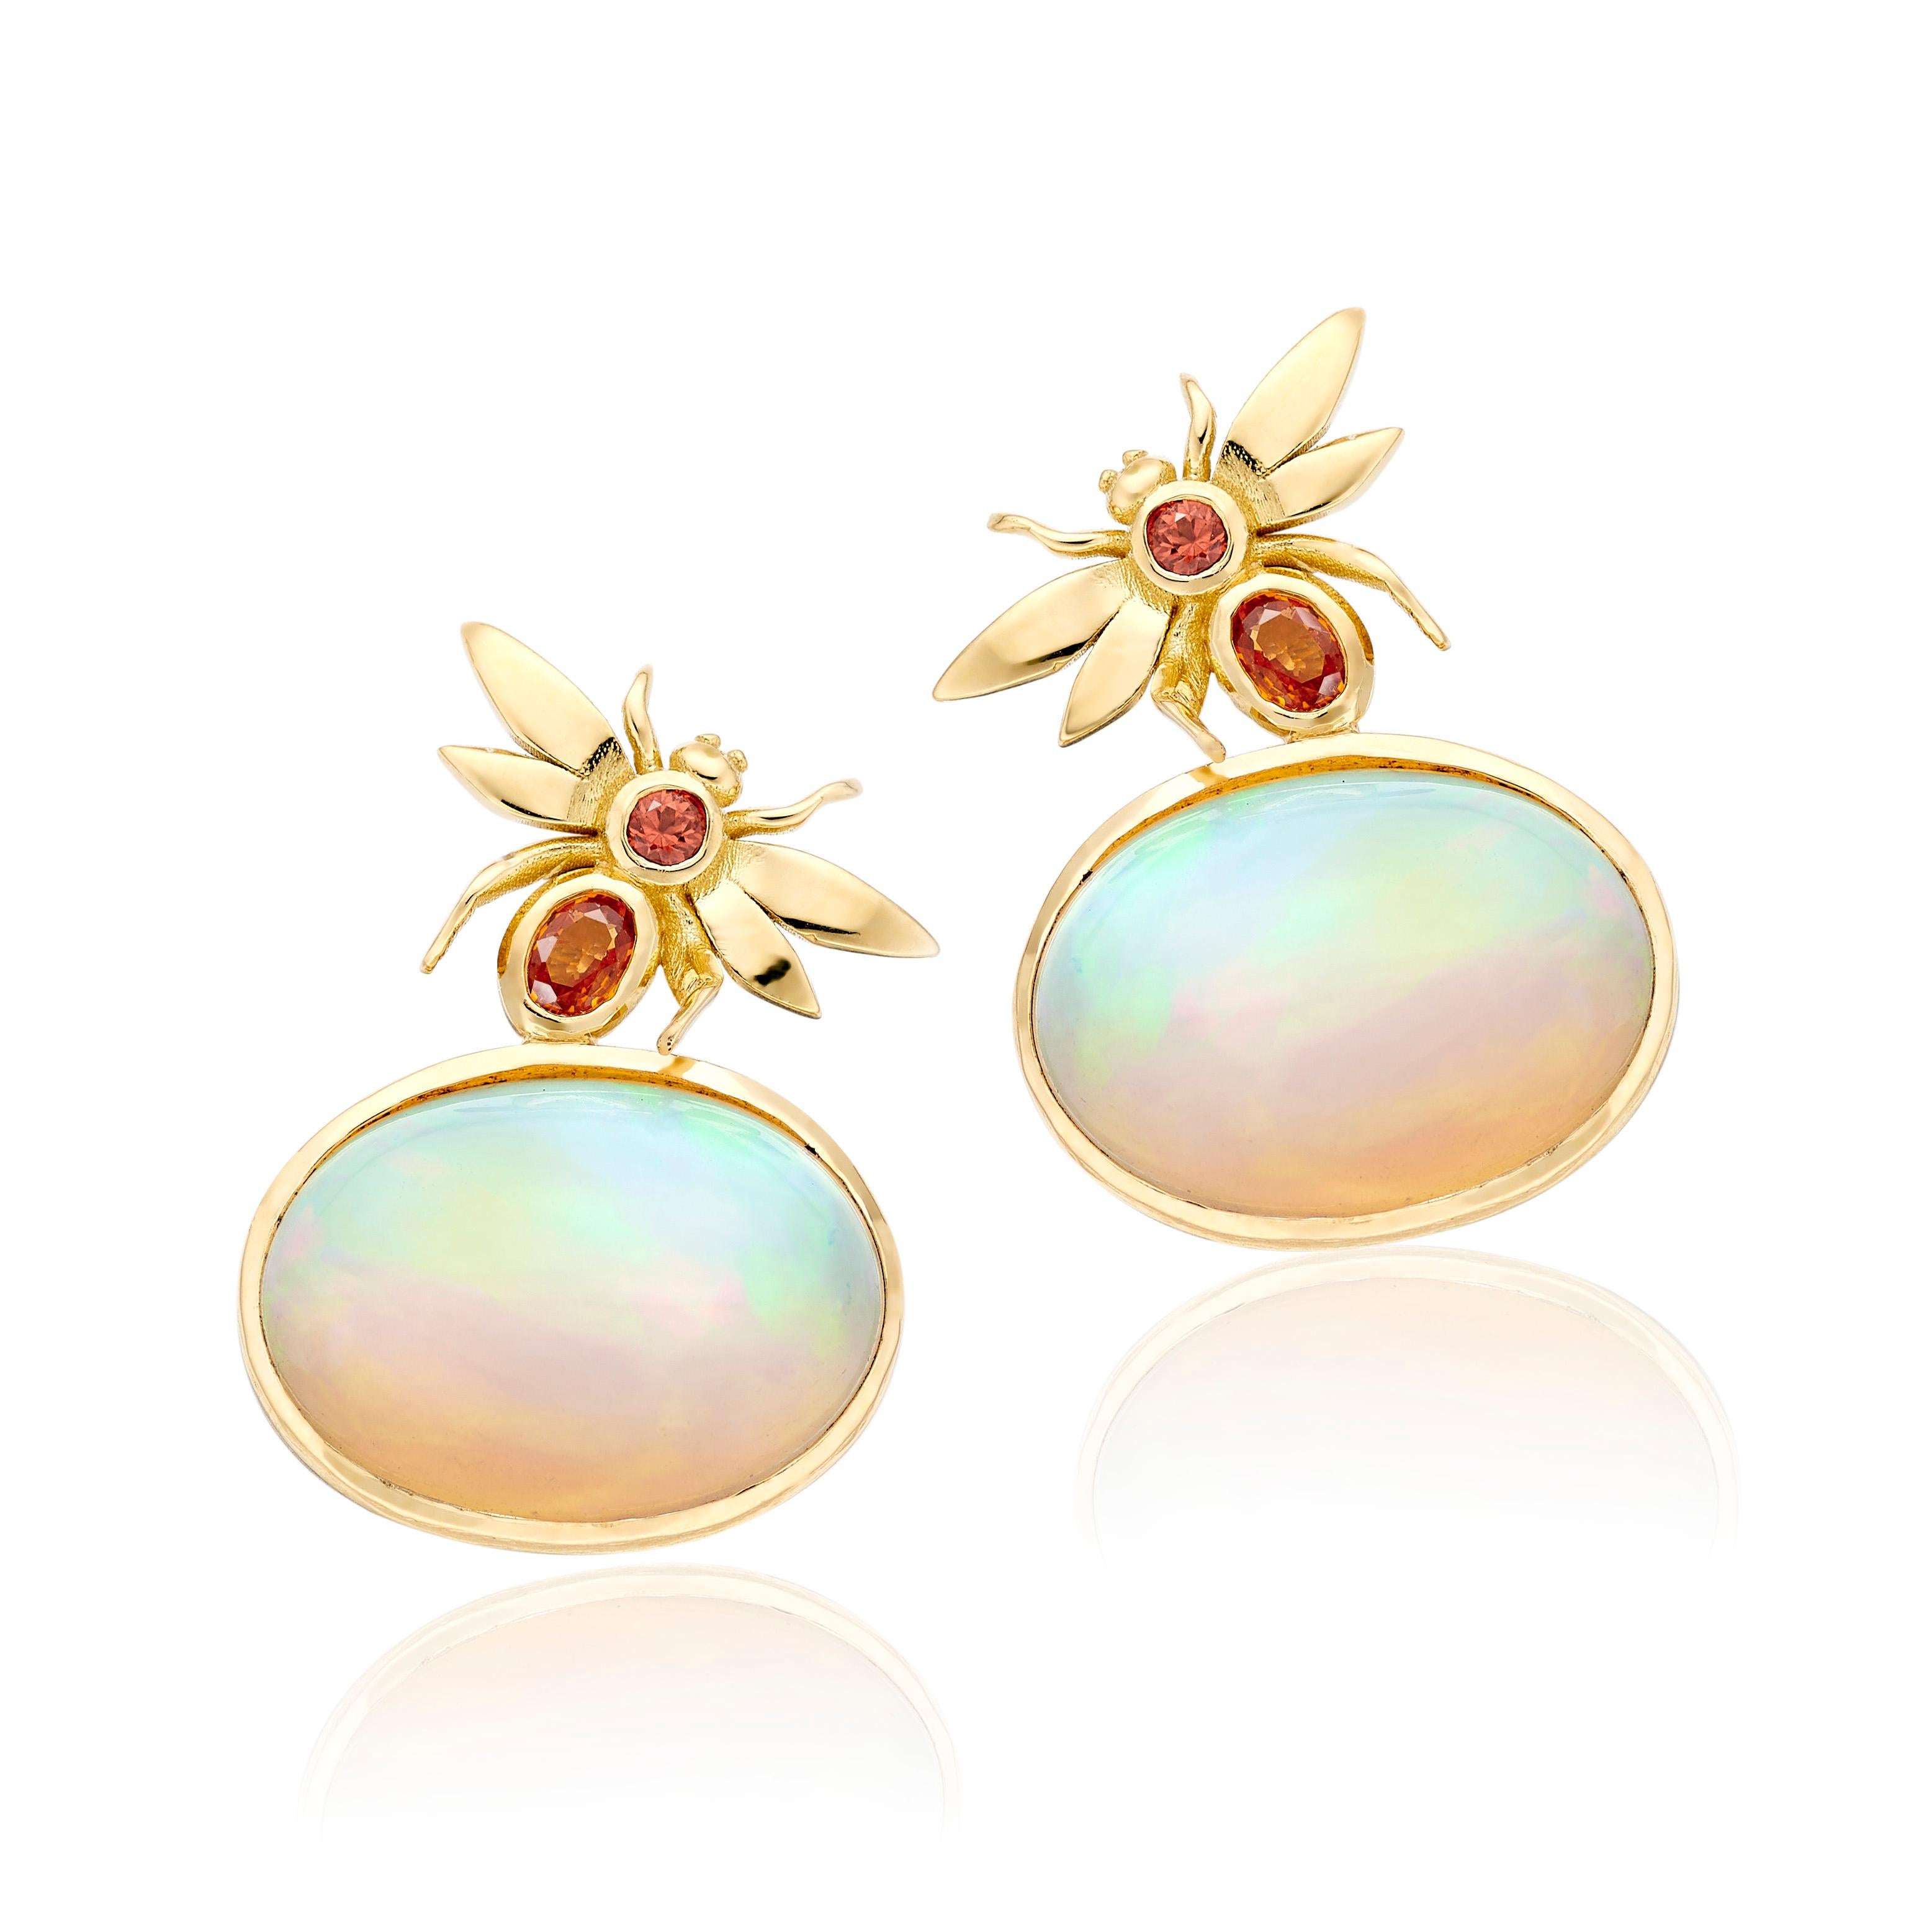 A pair of striking pearl earrings from Lilly Hastedt's
